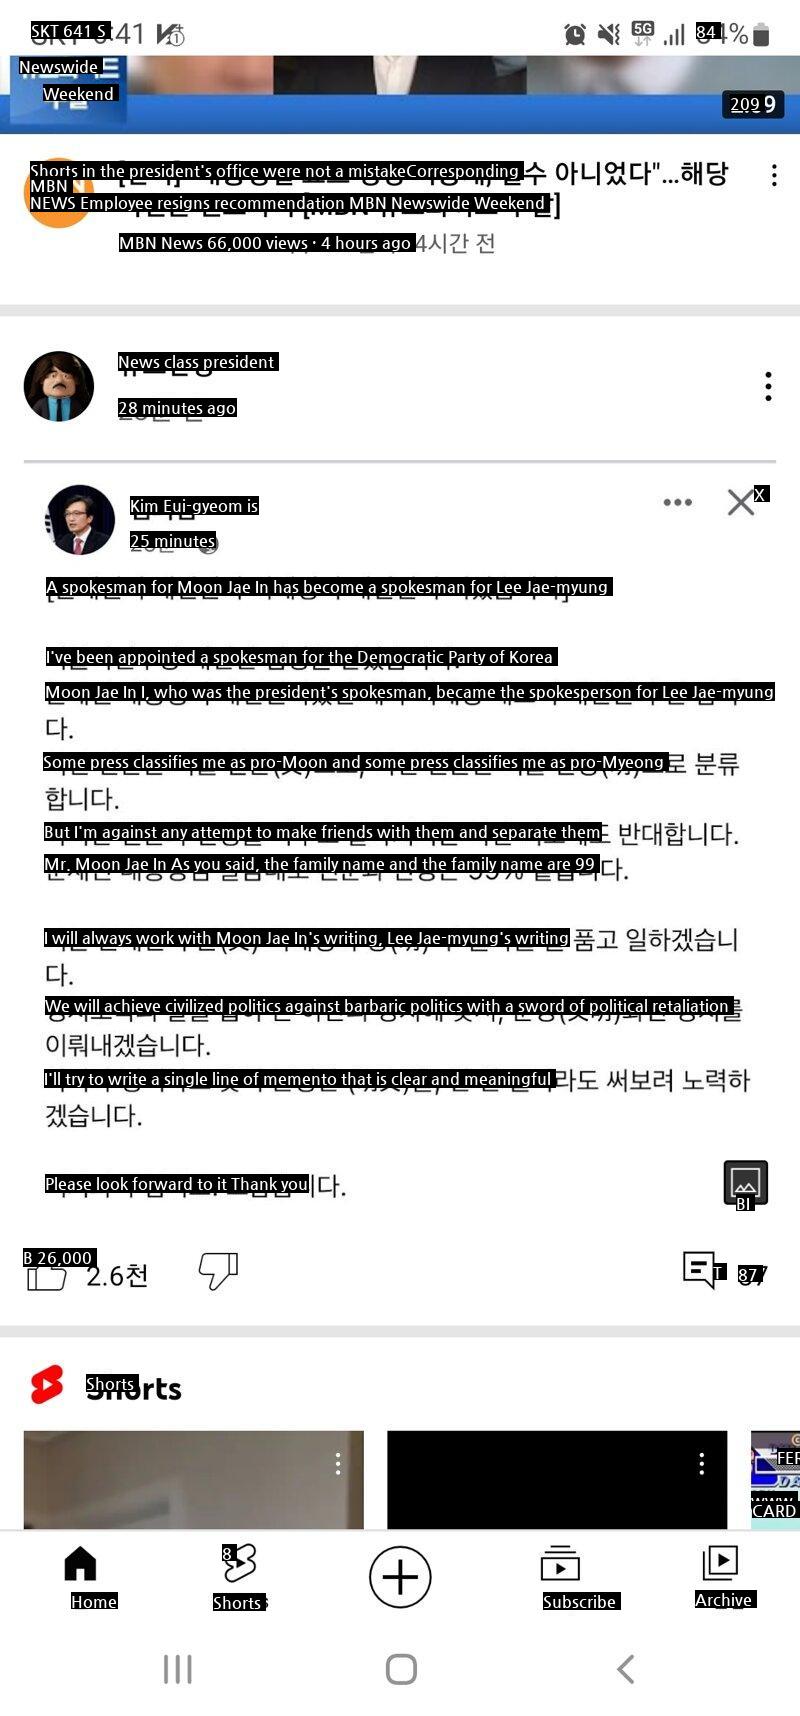 Second business, Han Dong-hoon's daughter's nephew's thesis 4th edition withdrawn